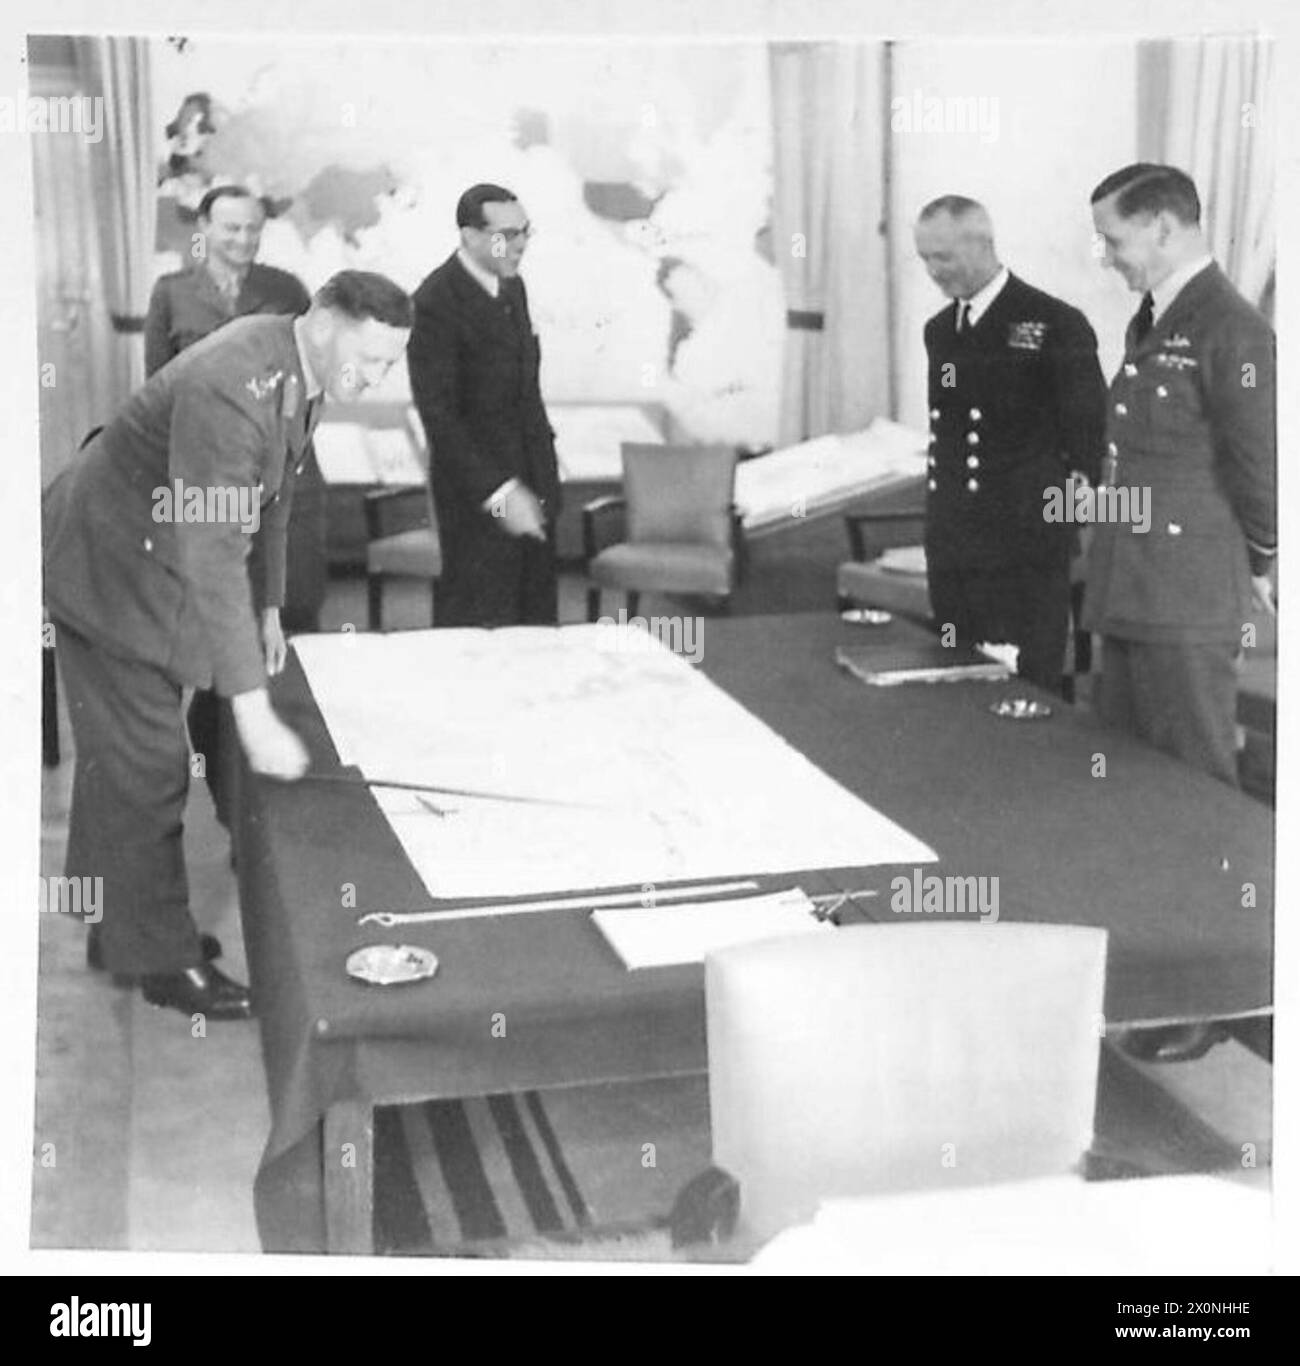 CONFERENCE OF THE THREE M.E. SERVICE CHIEFS - General Sir Claude Auchinleck, the C-in-C with Sir Walter Monckton (acting Minister of State), Admiral sir Andrew Cunningham (Mediterranean Fleet) and Air Marshal Sir A. Tedder. The C-in-C is pointing to a map. Photographic negative , British Army Stock Photo